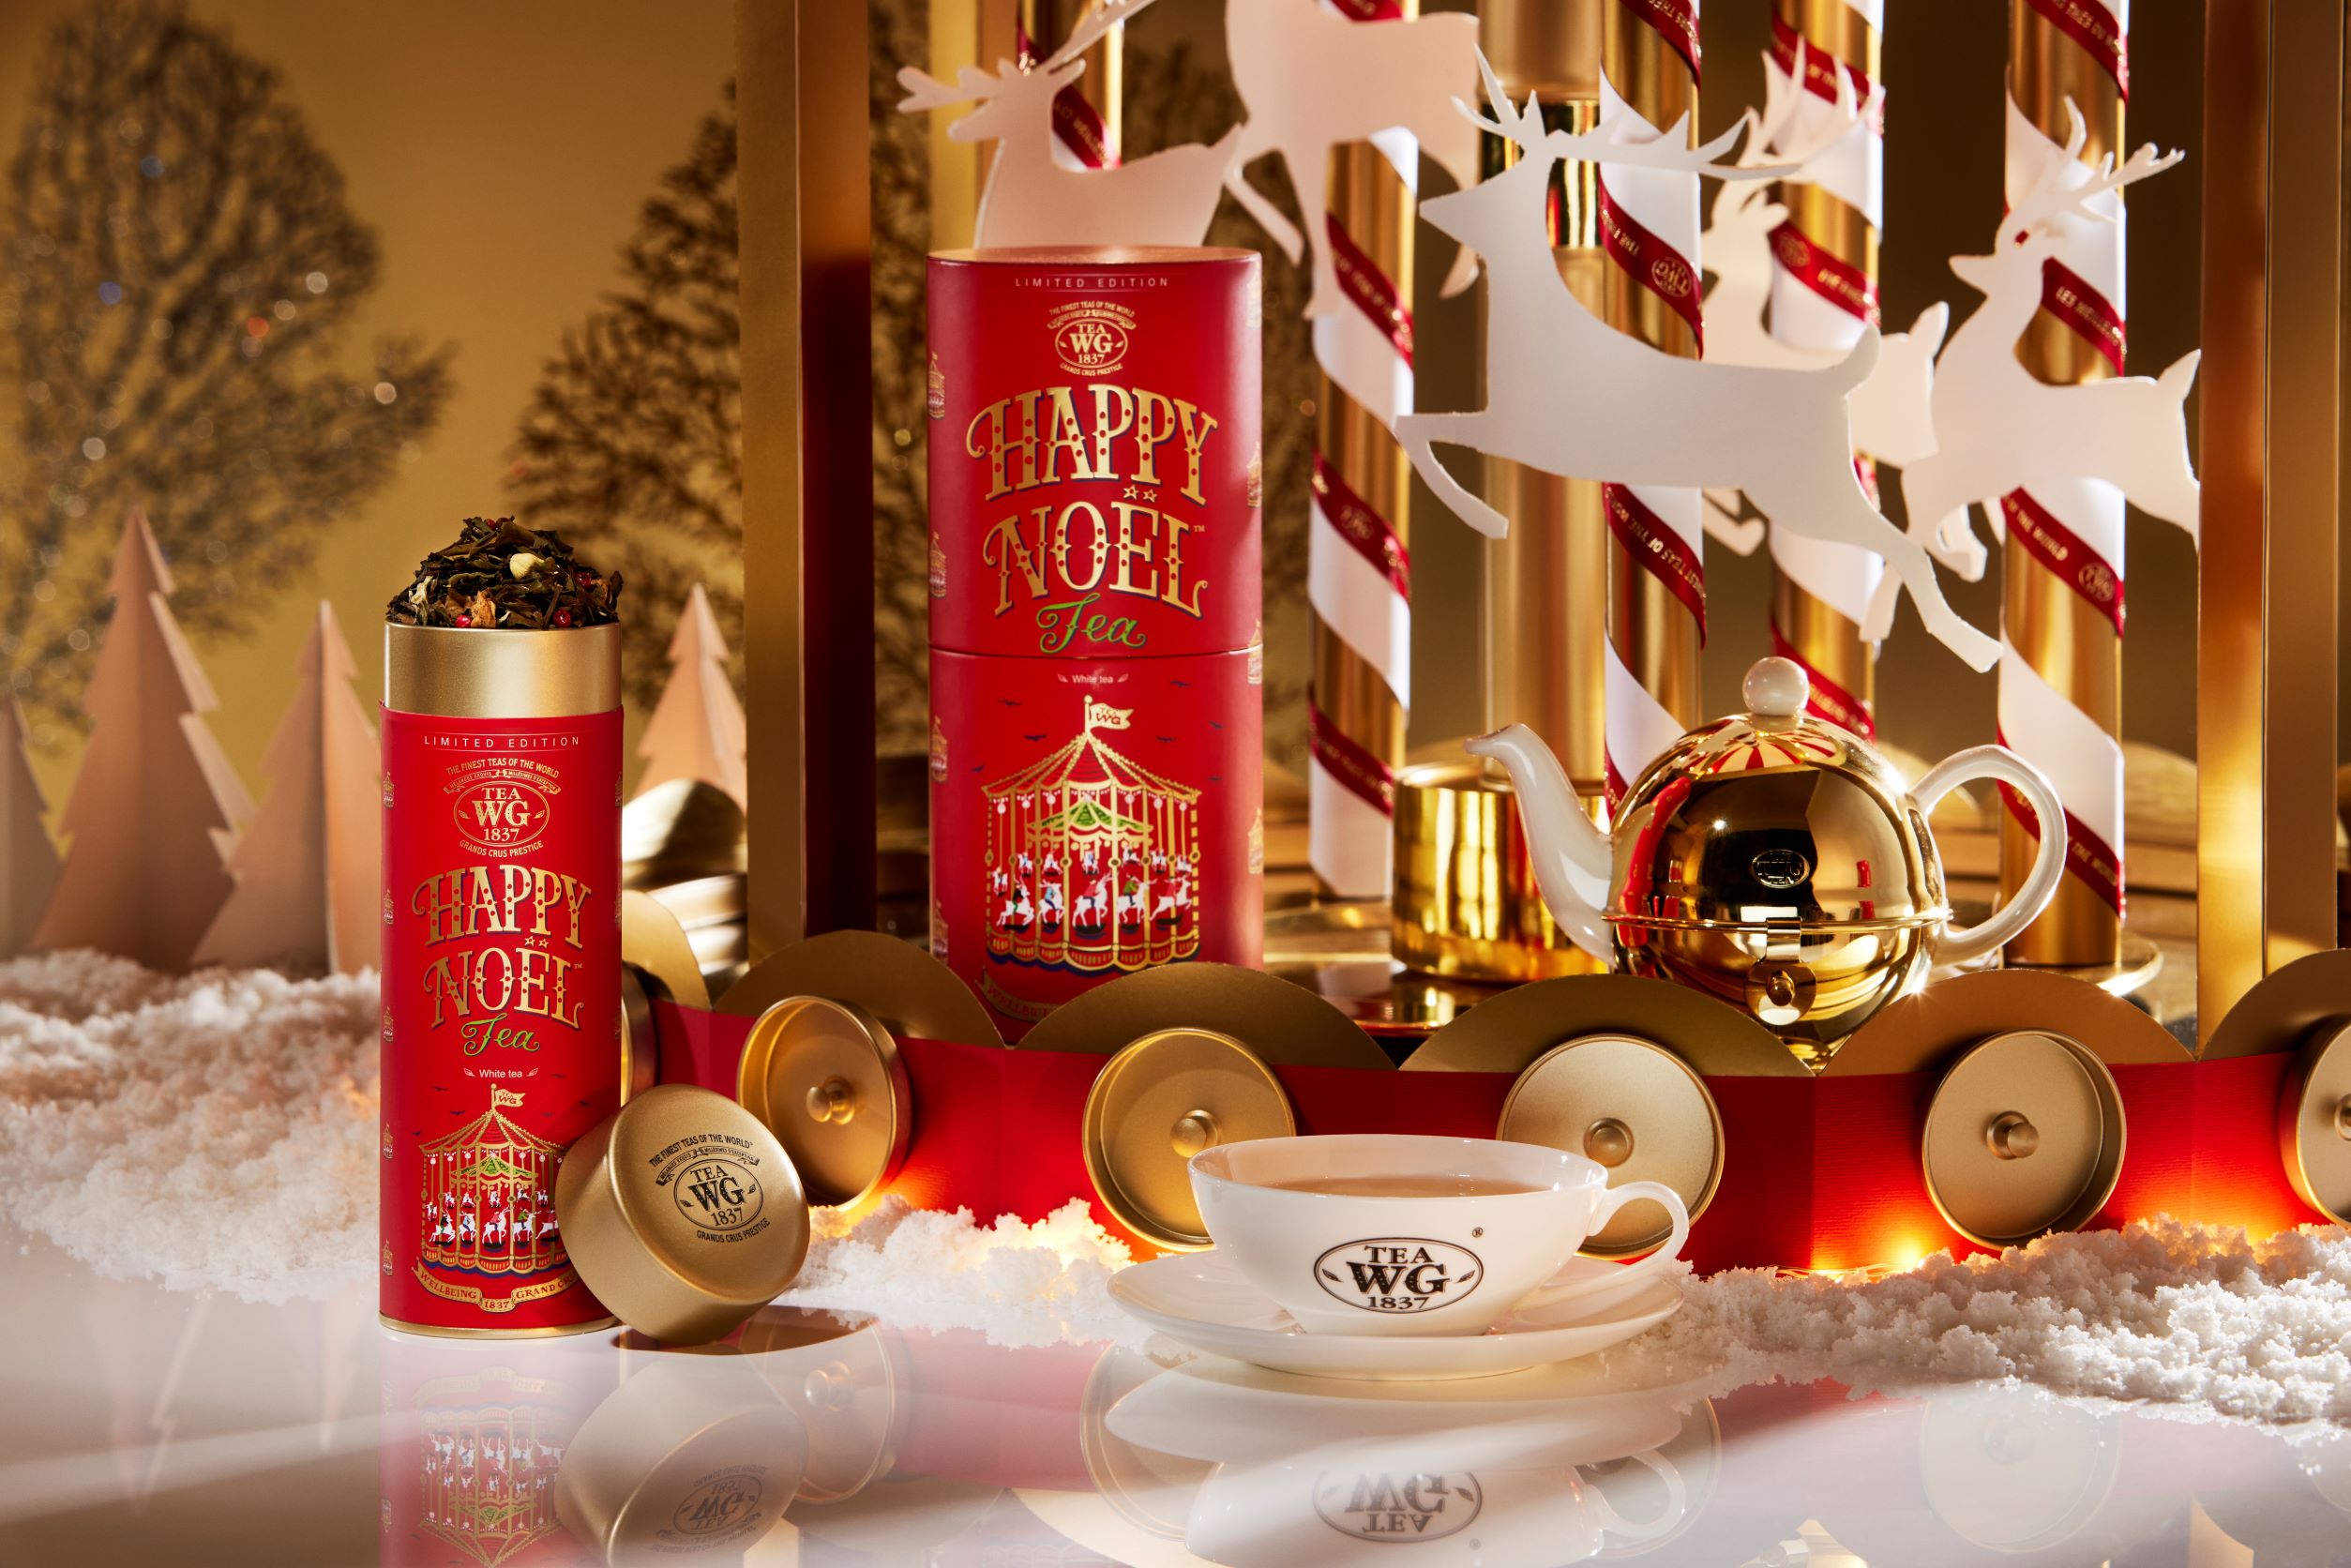 An ode to the Season: an Enchanting Christmas with Happy Noel Tea